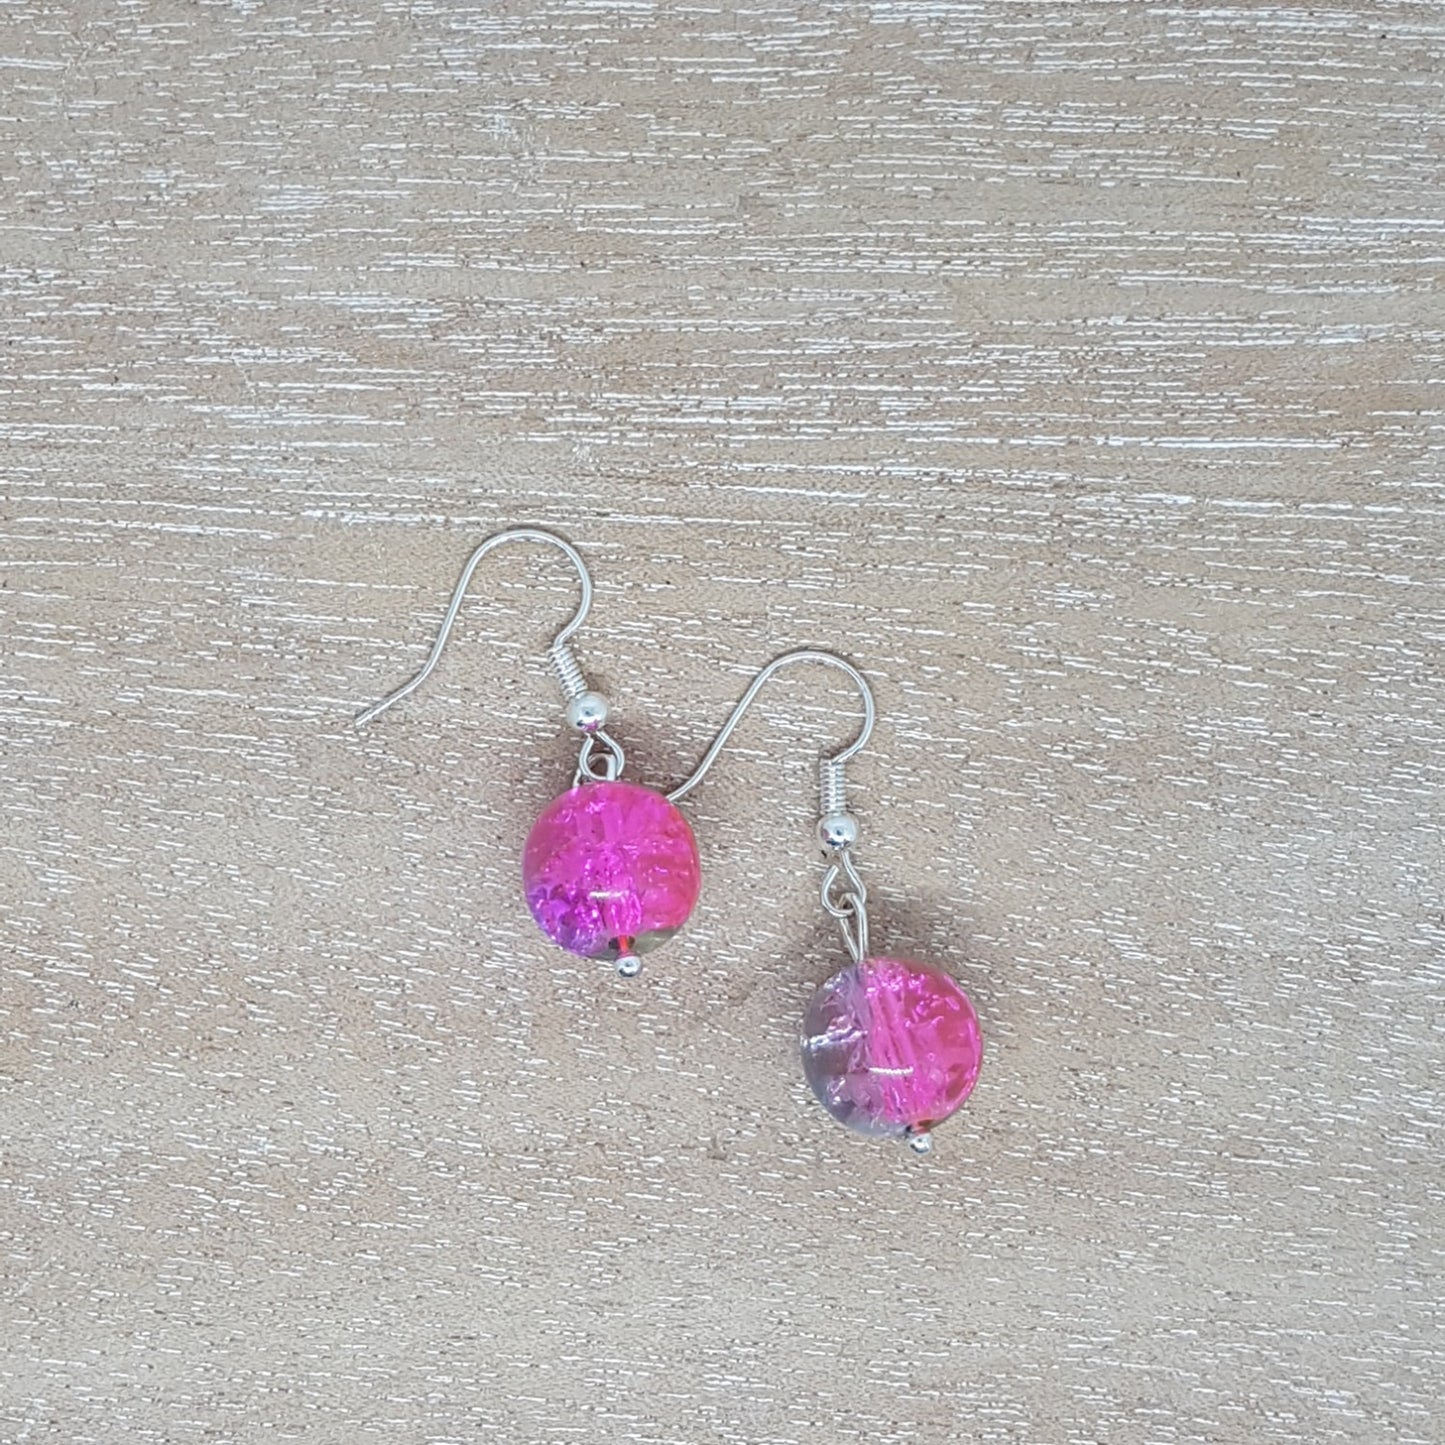 A pair of silver plated drop earrings with pink sparkly beads, sitting on a wooden table .